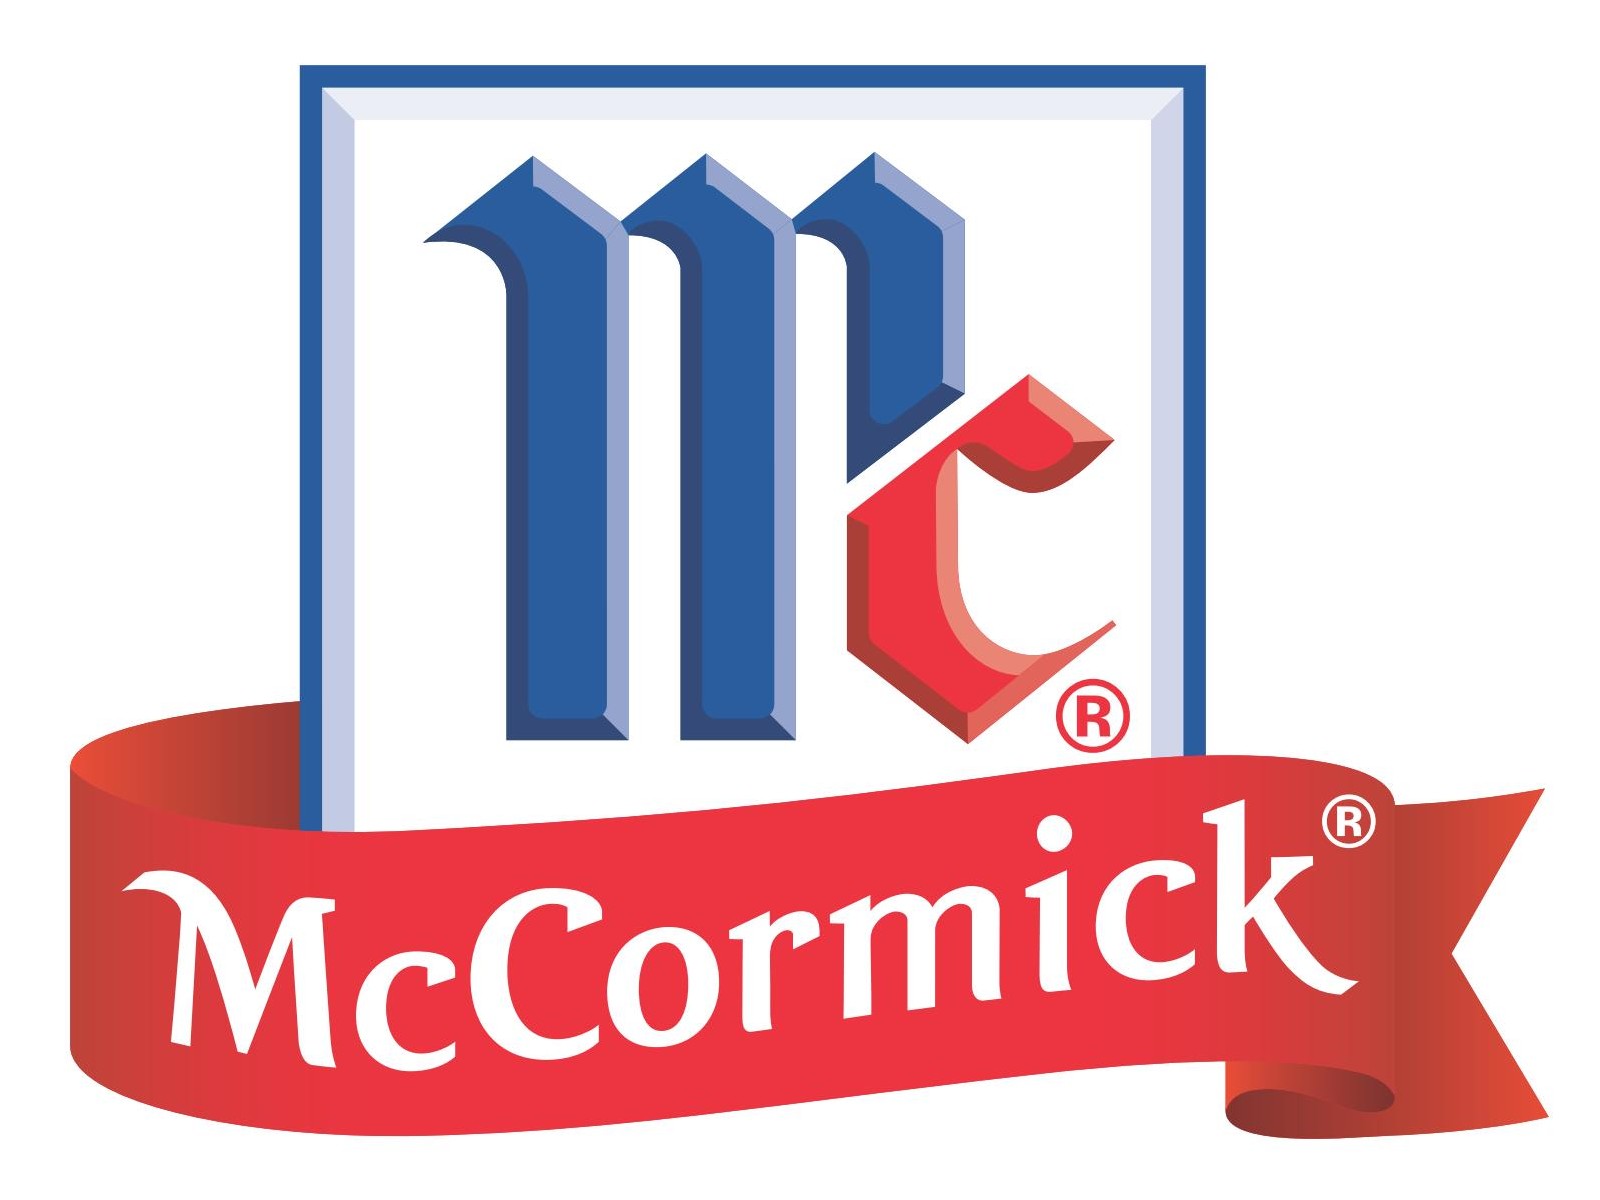 McCormick Spices